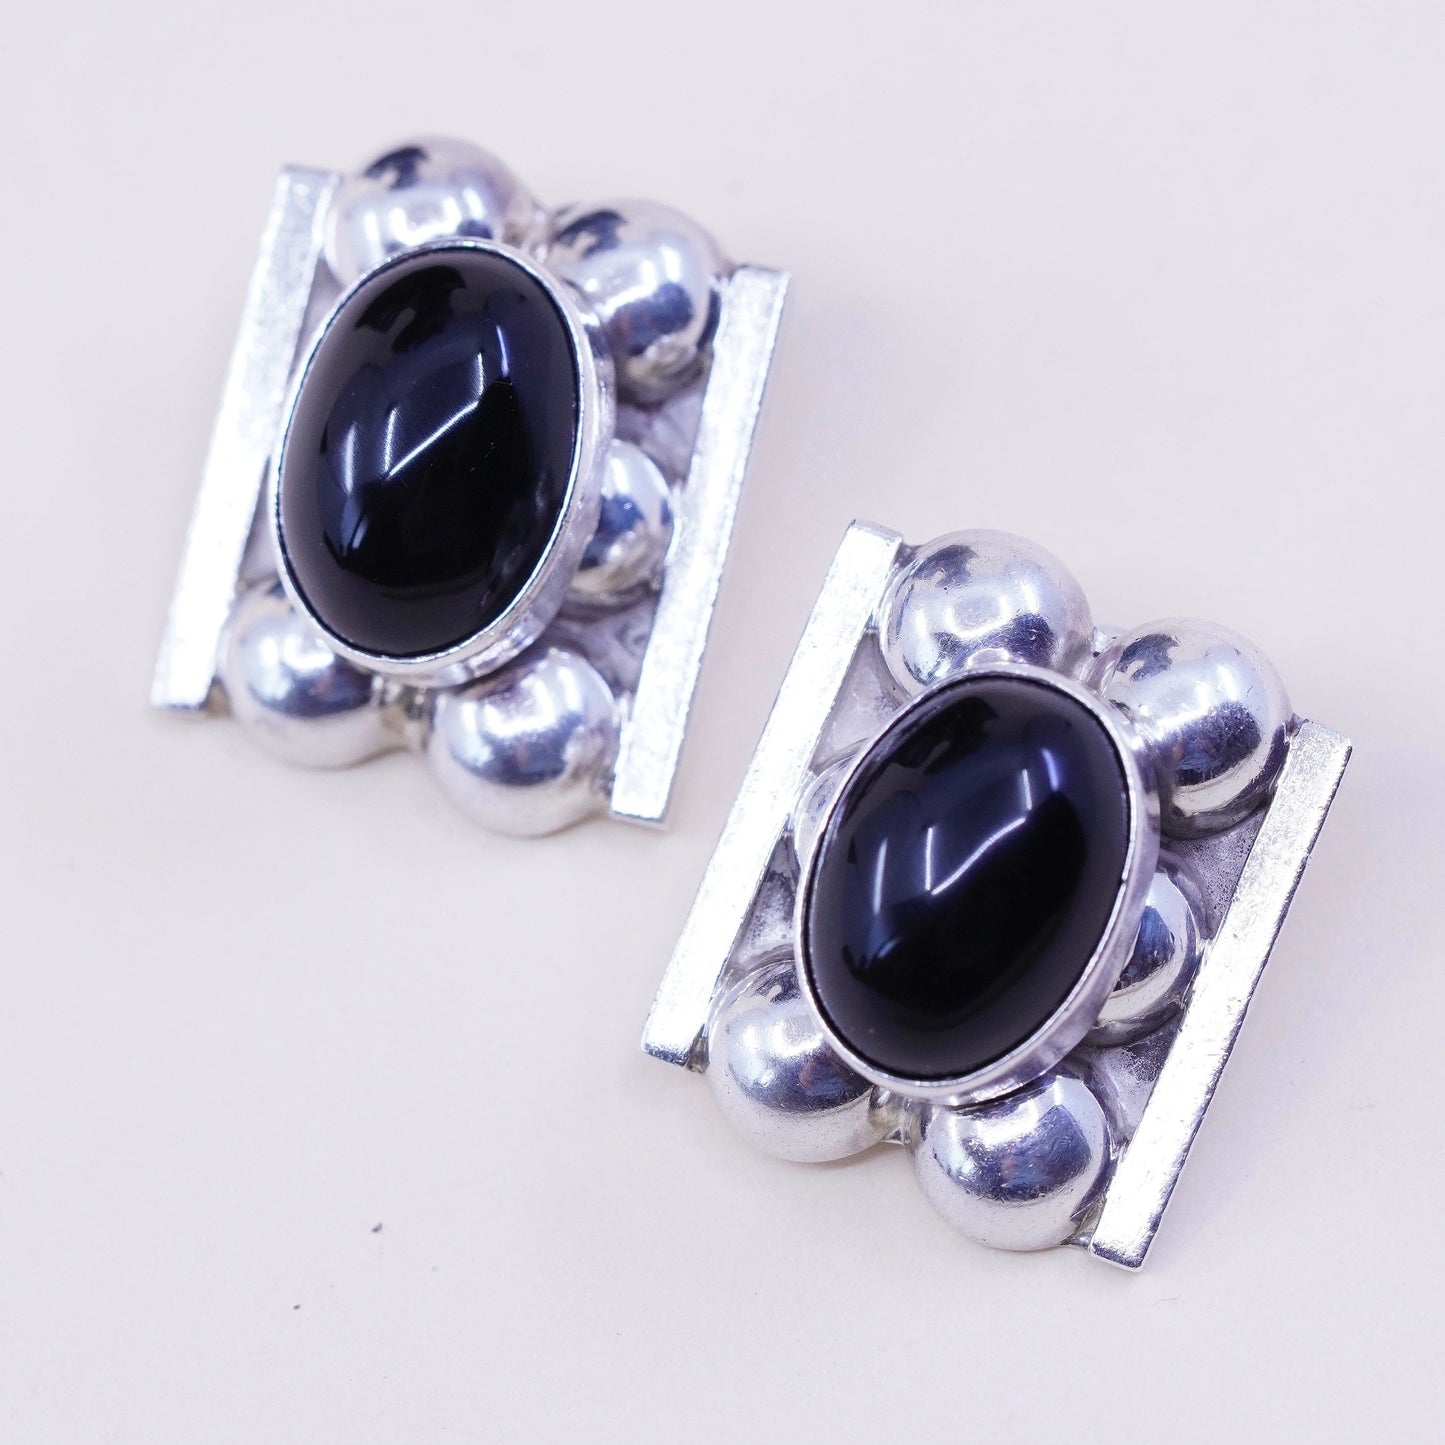 Vintage mexico Sterling 925 silver handmade clip on earrings with oval obsidian, stamped mexico 925 TJ-76